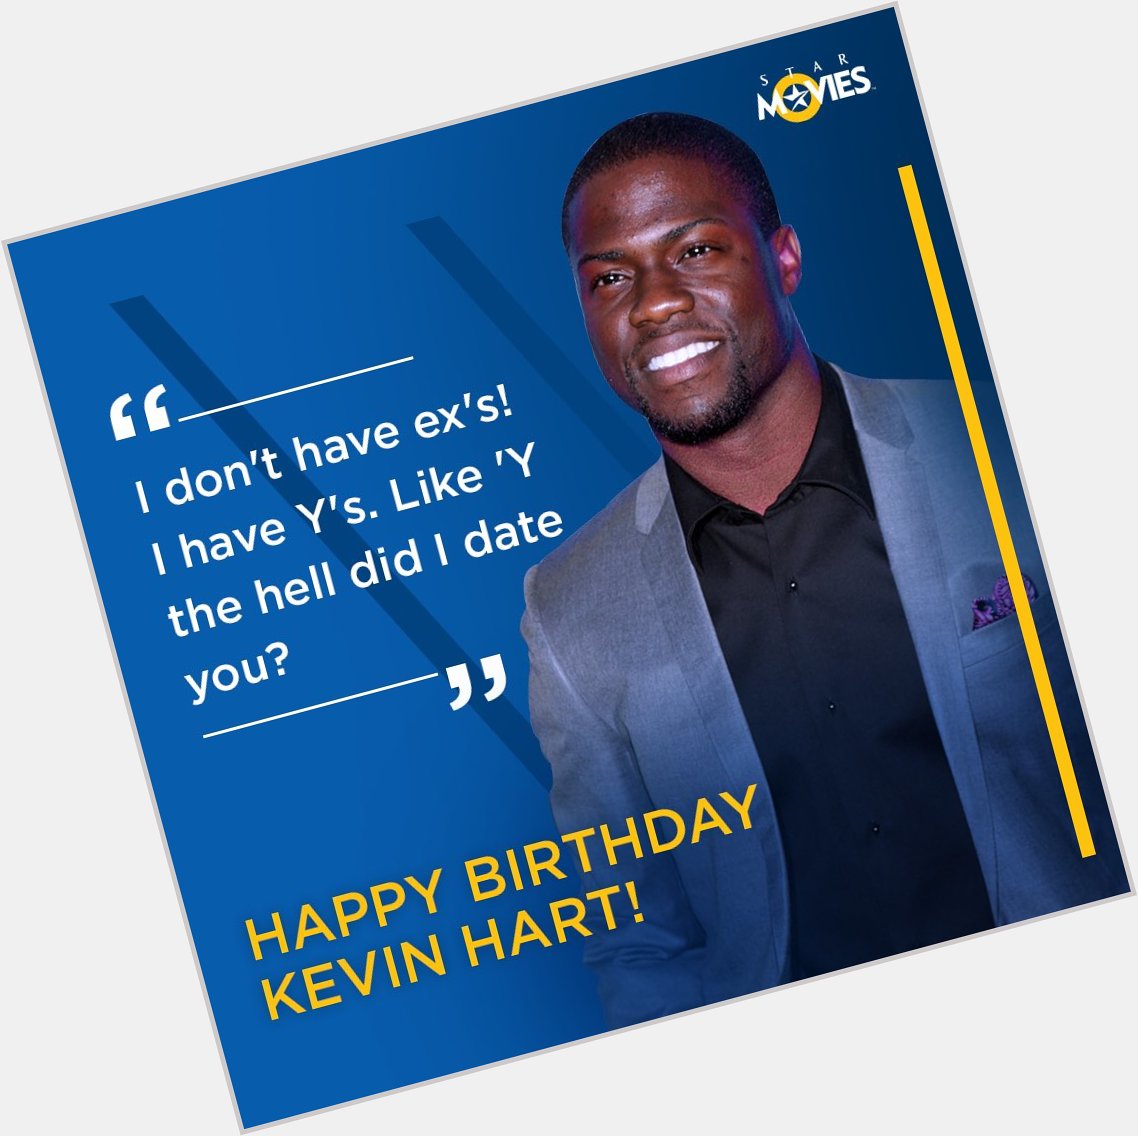 This birthday boy sees the funny side of any sad situation! Happy Birthday, Kevin Hart! 